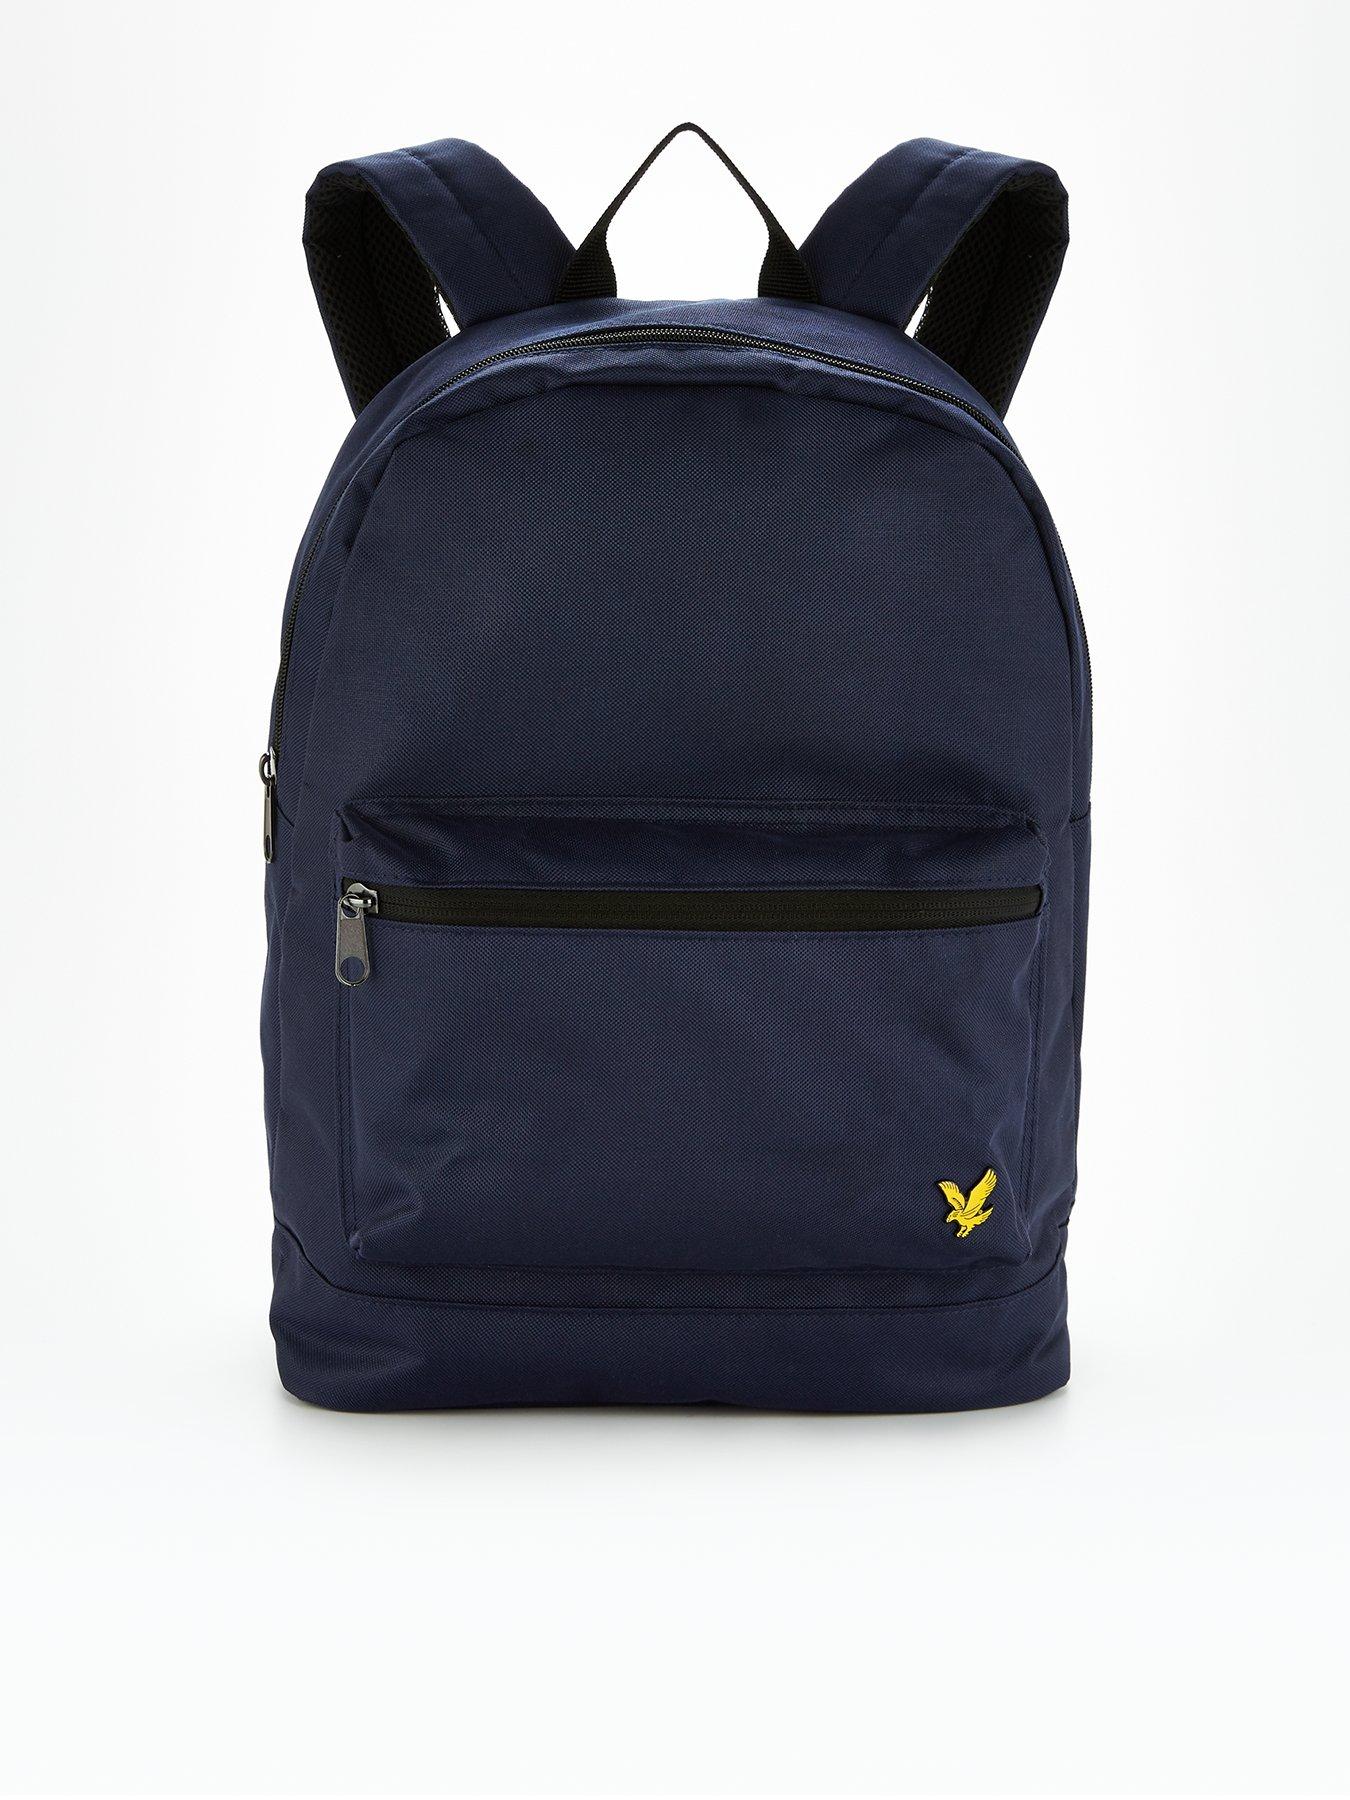 Accessories Logo Backpack - Navy